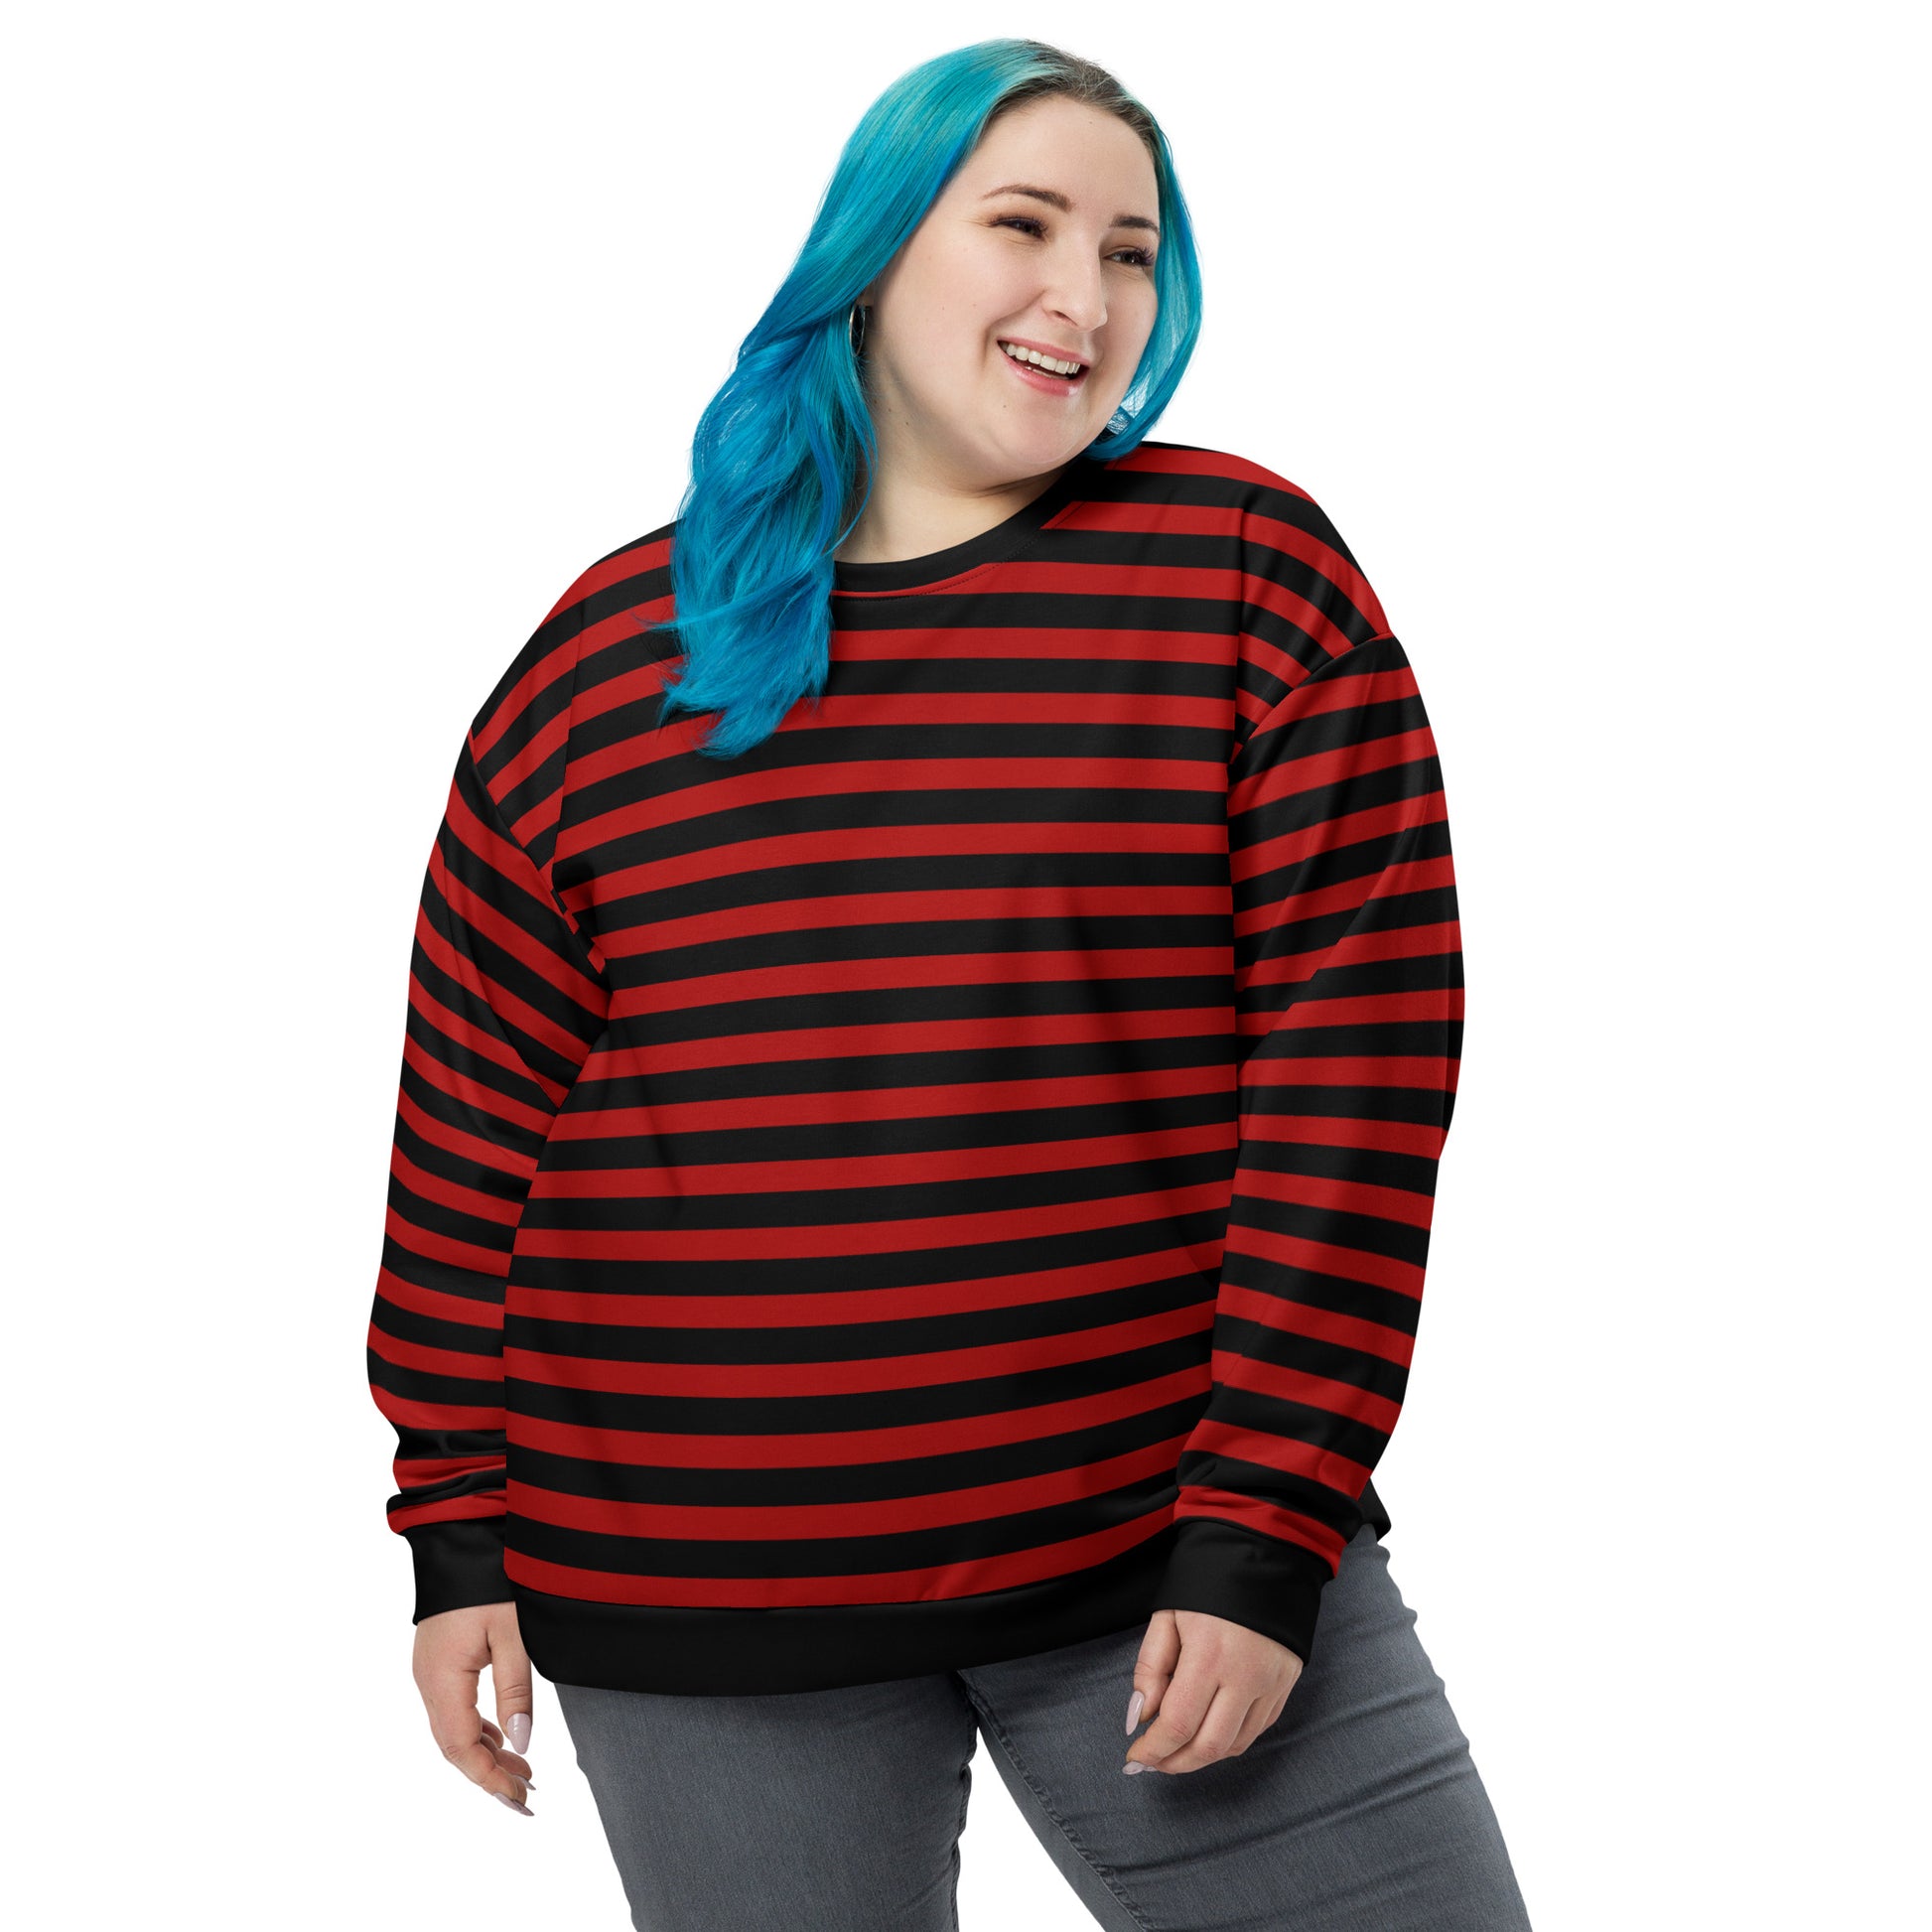 Black And Red striped Sweater